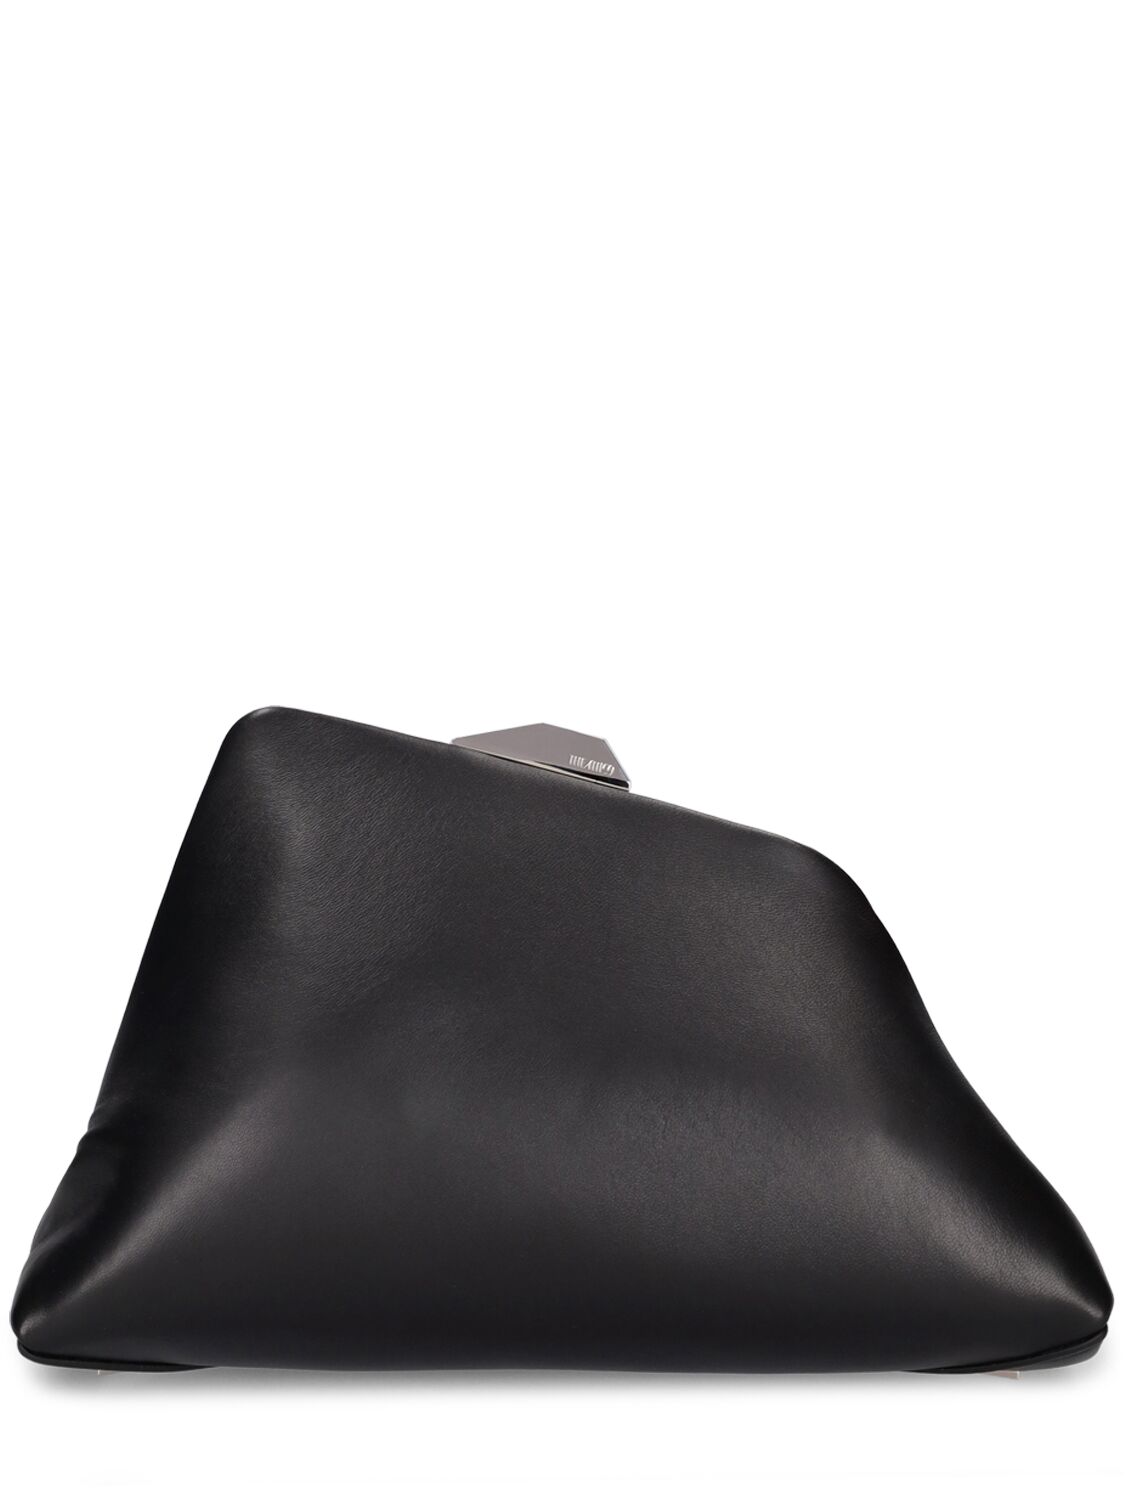 Image of Day Off Leather Clutch